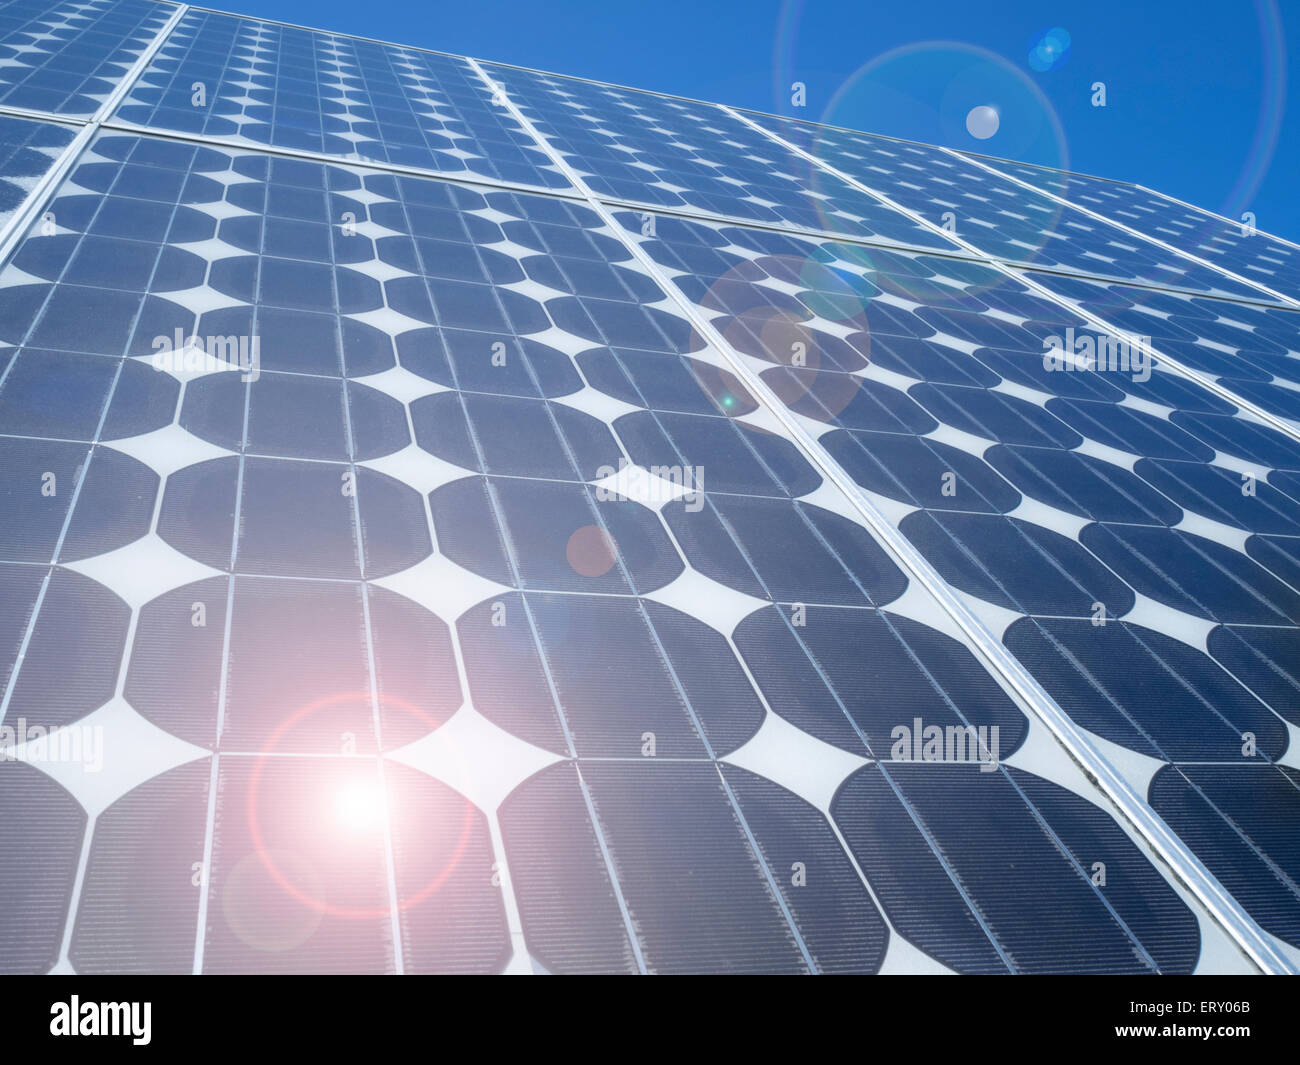 Blue solar panels photovoltaic cells array close up abstract background  Renewable energy clean eco friendly power source global warming concept Stock Photo